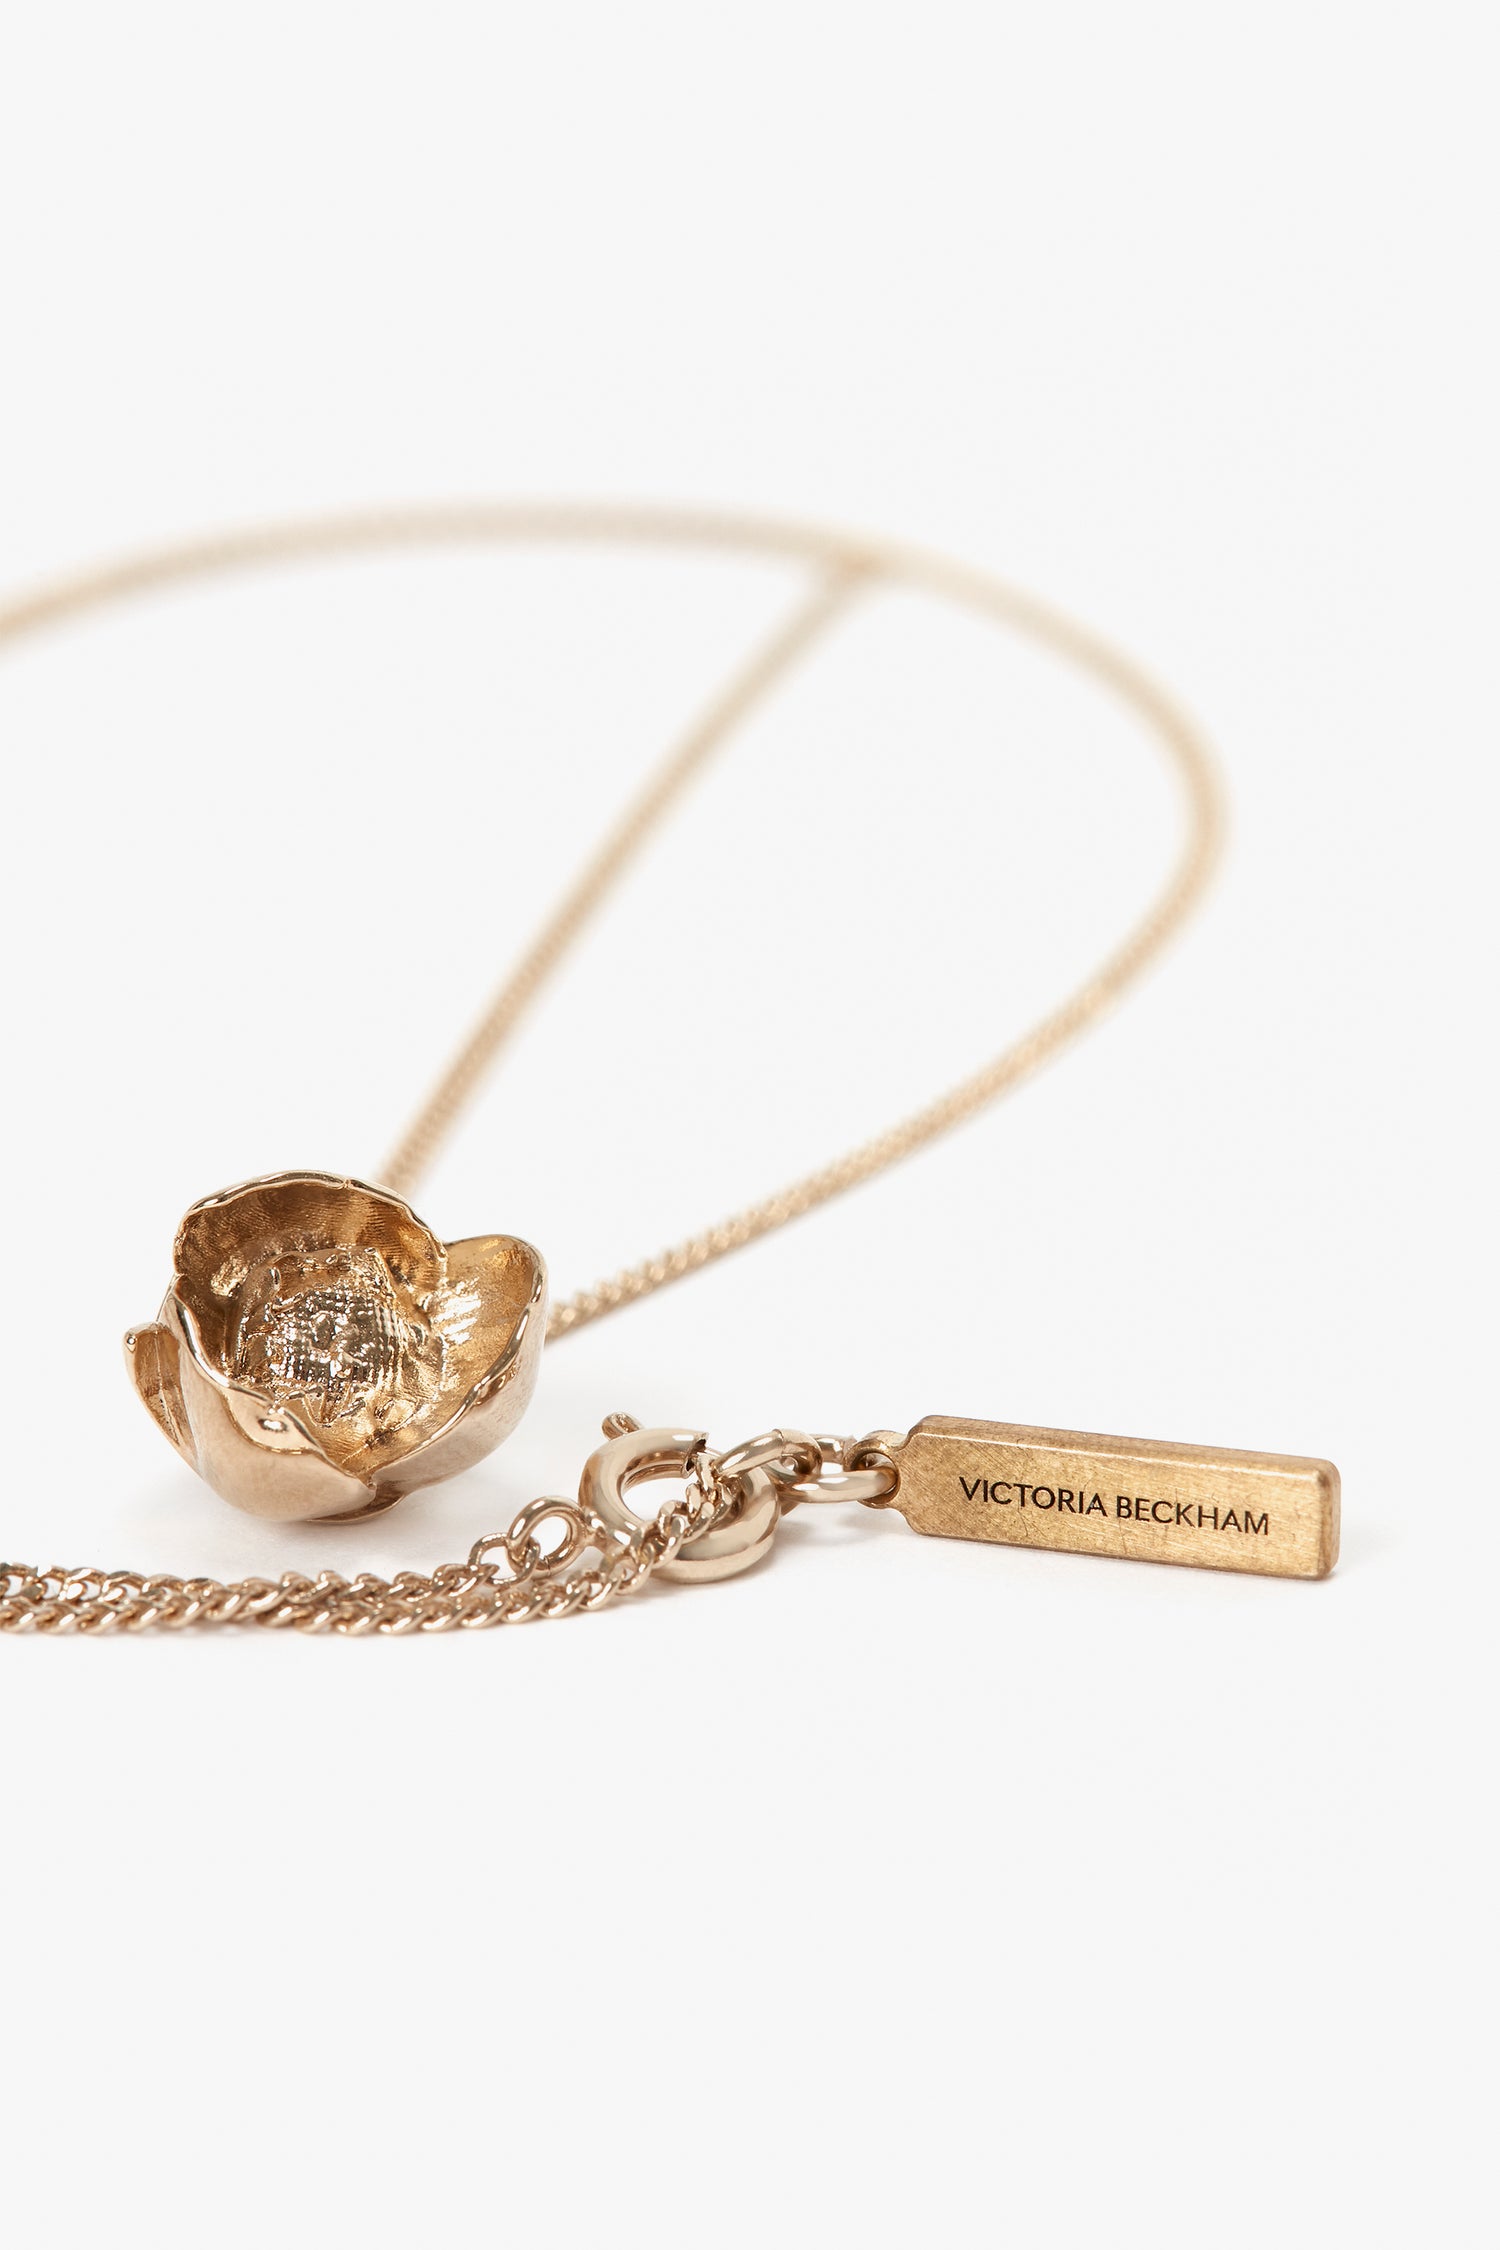 An **Exclusive Camellia Flower Necklace In Gold** featuring a pendant resembling a Camellia Flower and a rectangular tag inscribed with "**Victoria Beckham**." The chain, handcrafted in Italy, has a lobster clasp for closure.